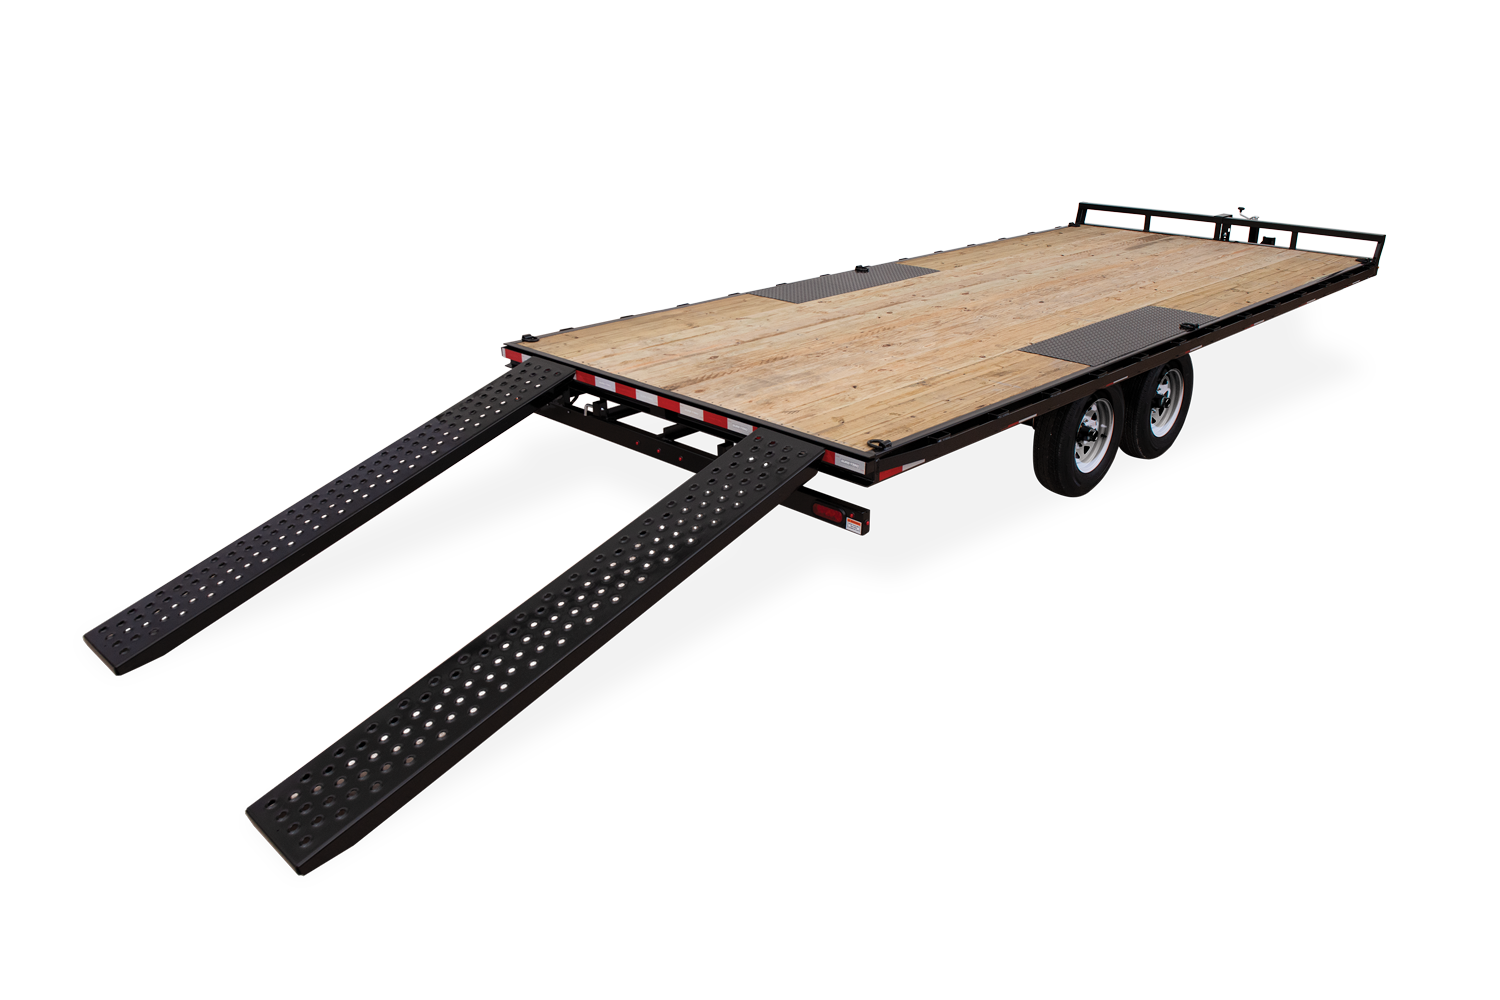 Rear View of the Low Profile Flatbed Deckover with ramps down